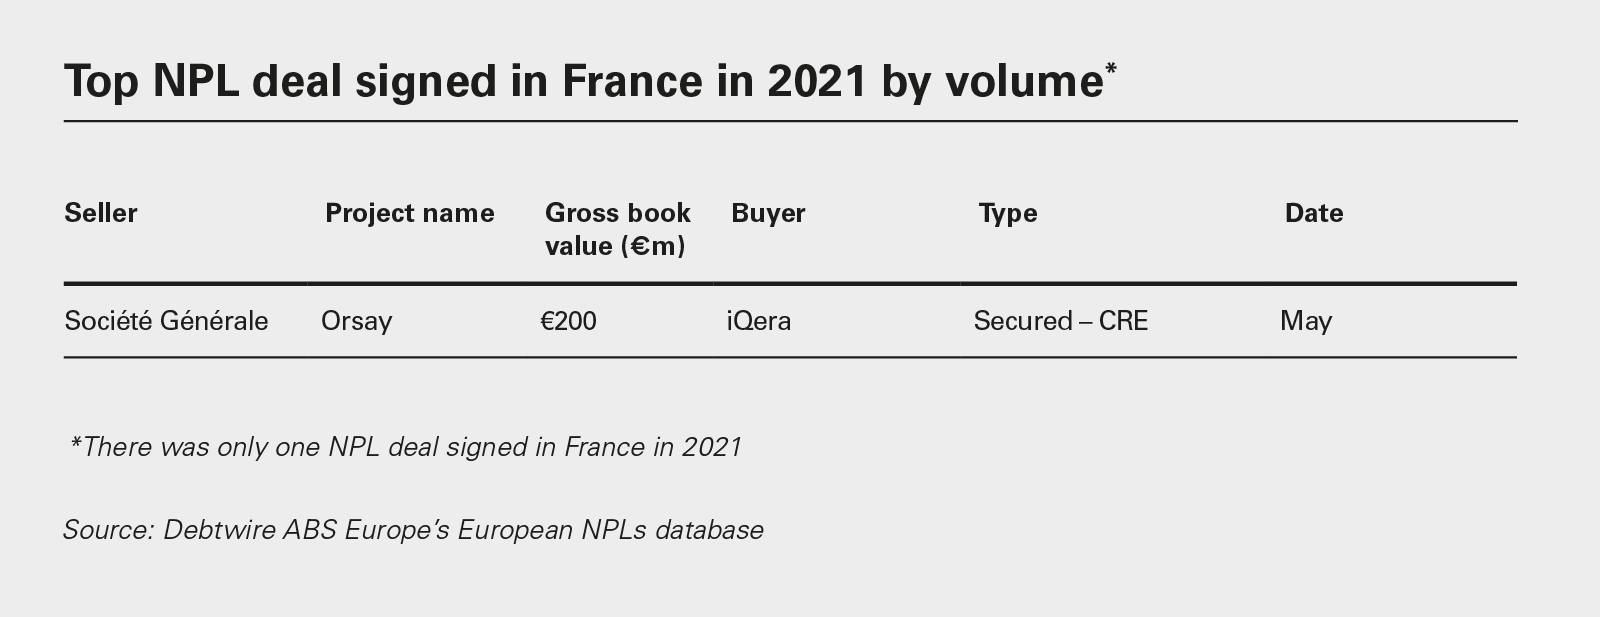 Top NPL deal signed in France in 2021 by volume